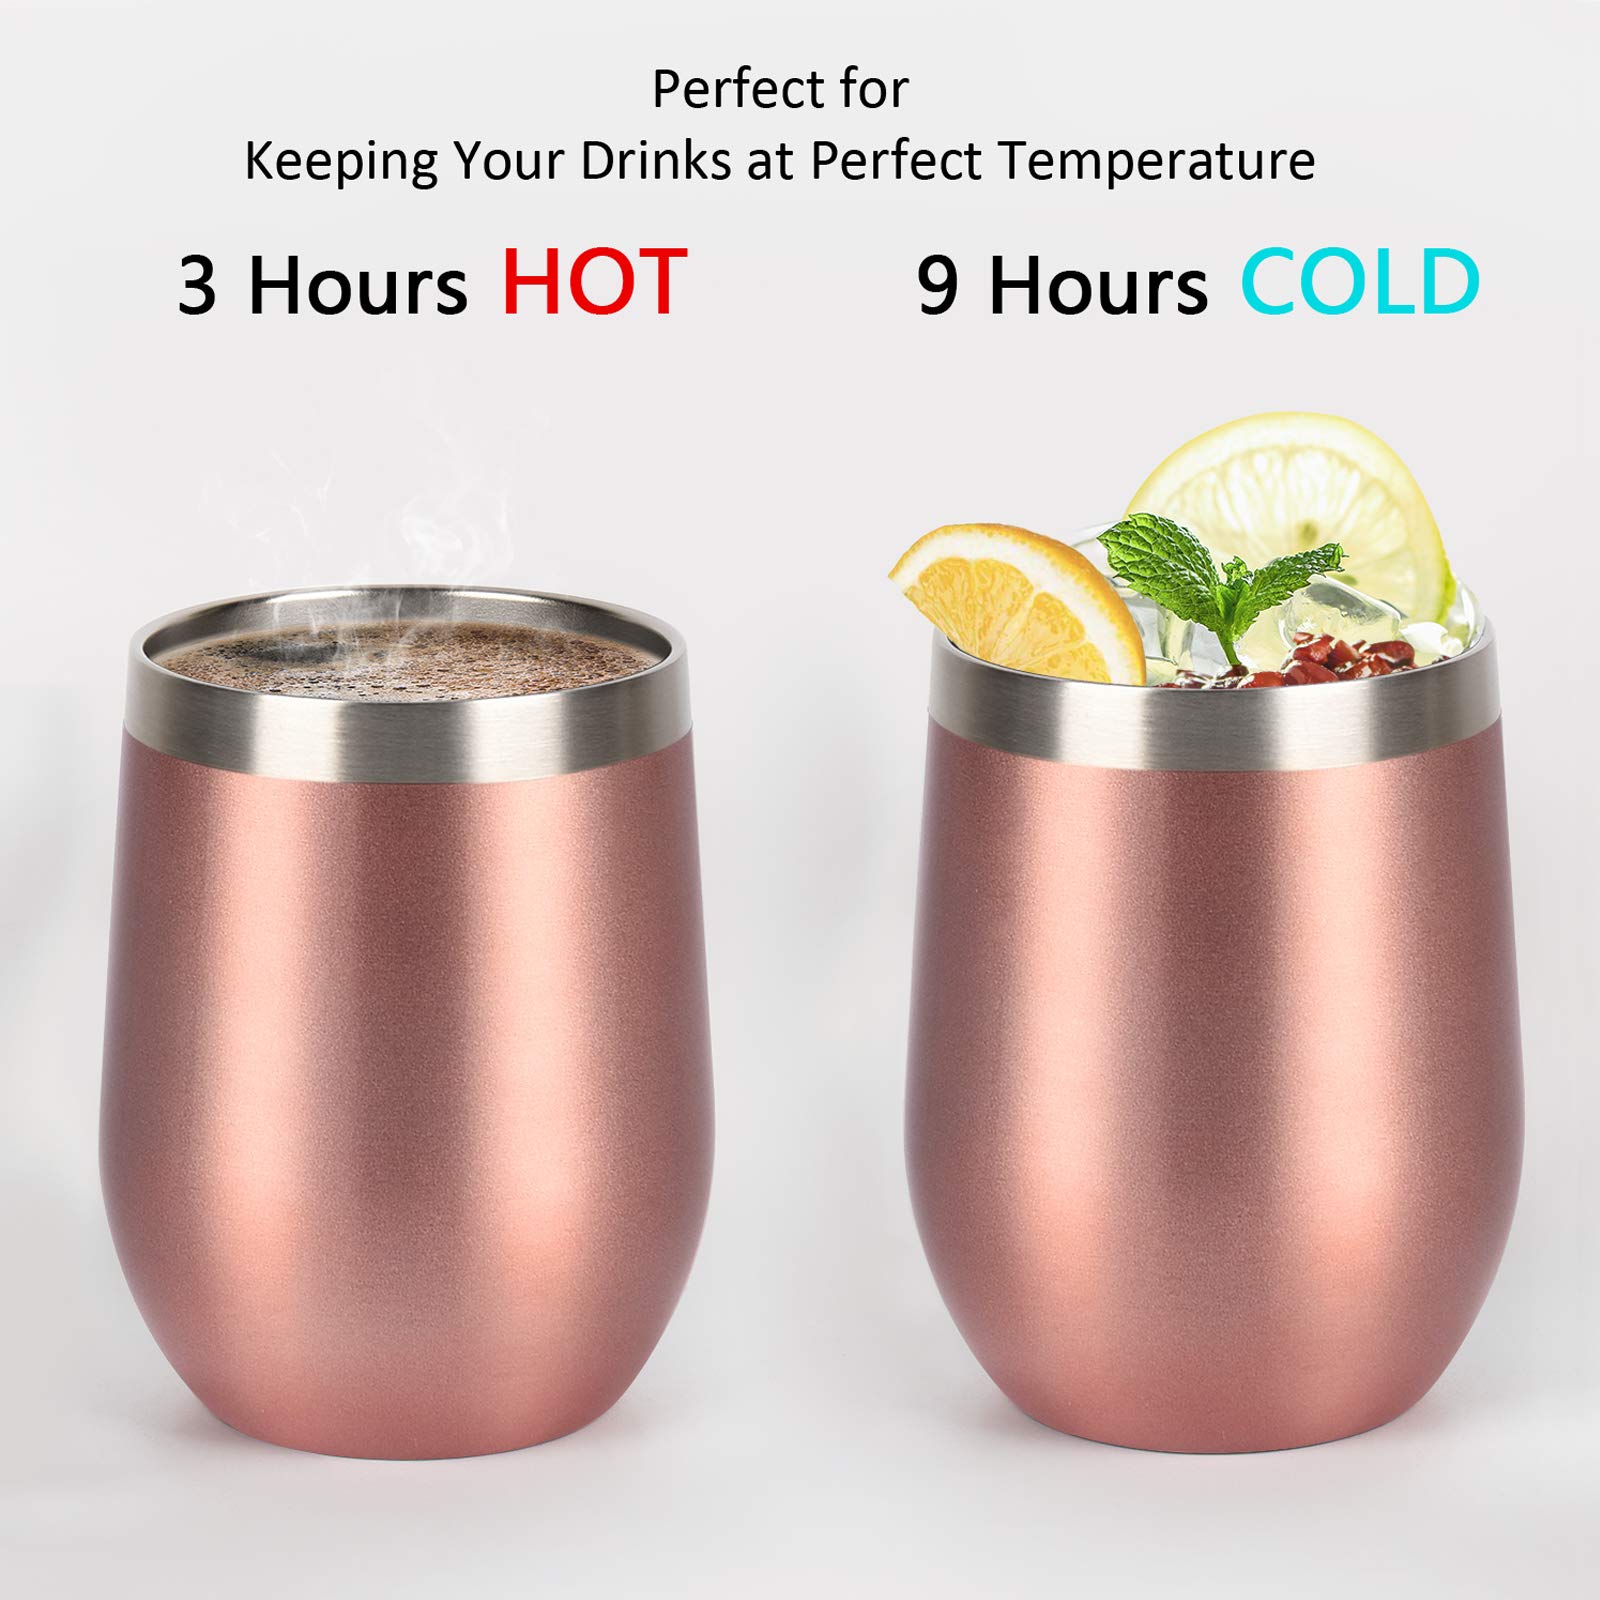 12 Pack Stainless Steel Wine Tumbler with Lid and Straw, 12 Oz Double Wall Vacuum Insulated Stemless Wine Glass Tumbler, Set of 12 Cup for Wine, Coffee, Champagne, Cocktails, Ice Cream, Rose Gold